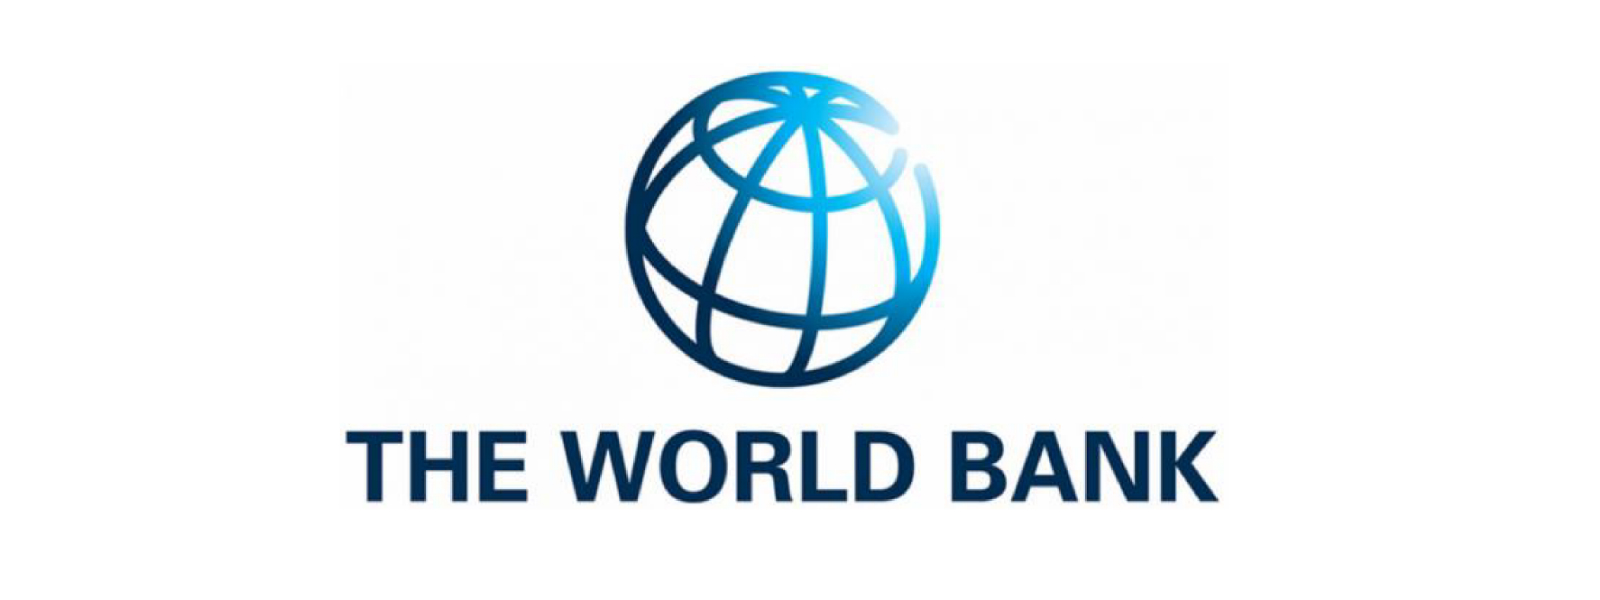 Sri Lanka’s growth forecast for 2019 down to 2.7% : World Bank